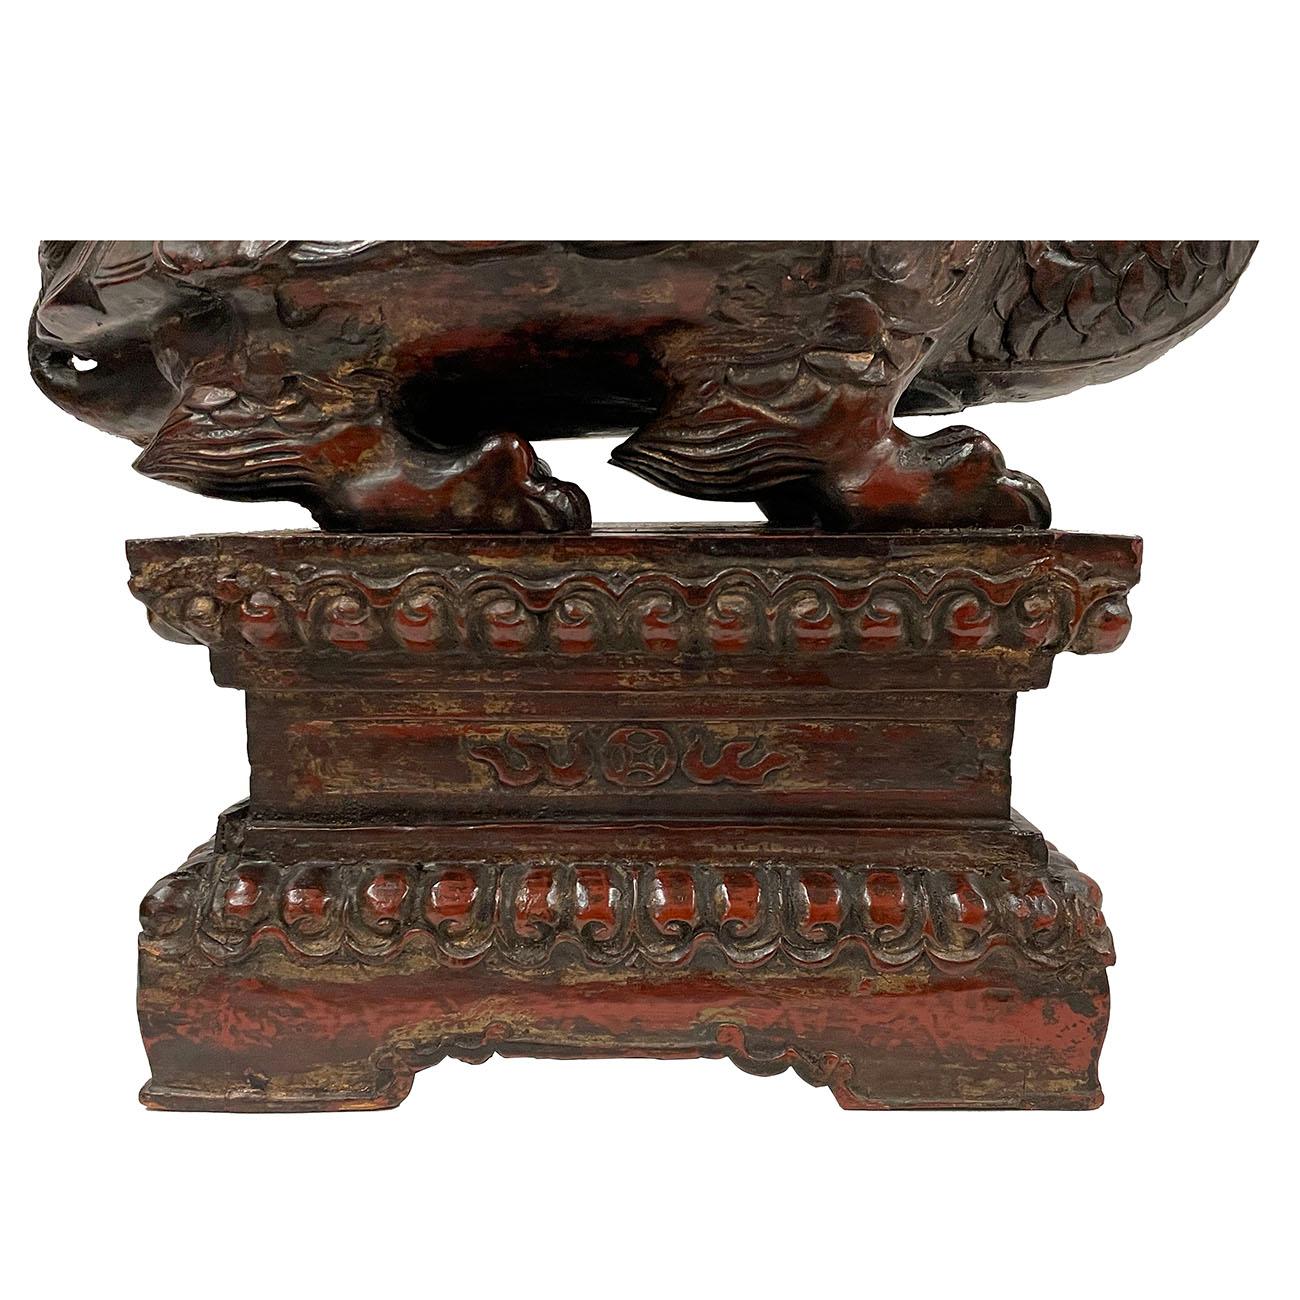 Chinese Export Early 20th Century Chinese Wooden Carved Dragon Turtle Sculpture